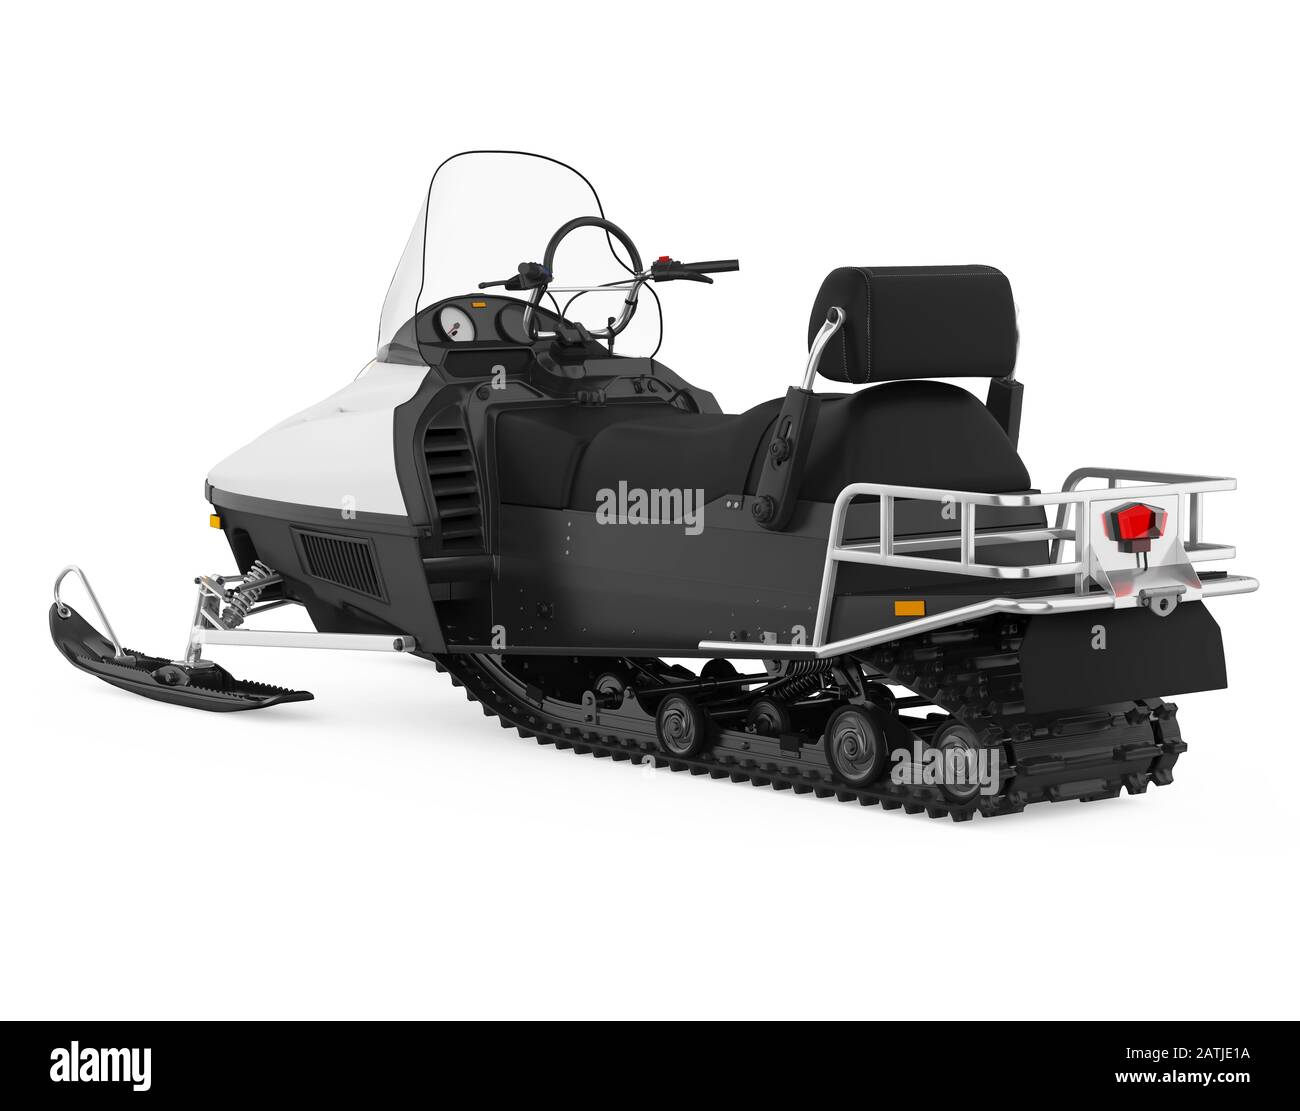 Snowmobile, Motor Sled Vehicle, Snow Jet Ski Isolated on White Background,  Side View, 3D Render Stock Illustration - Illustration of background,  rendering: 134347539